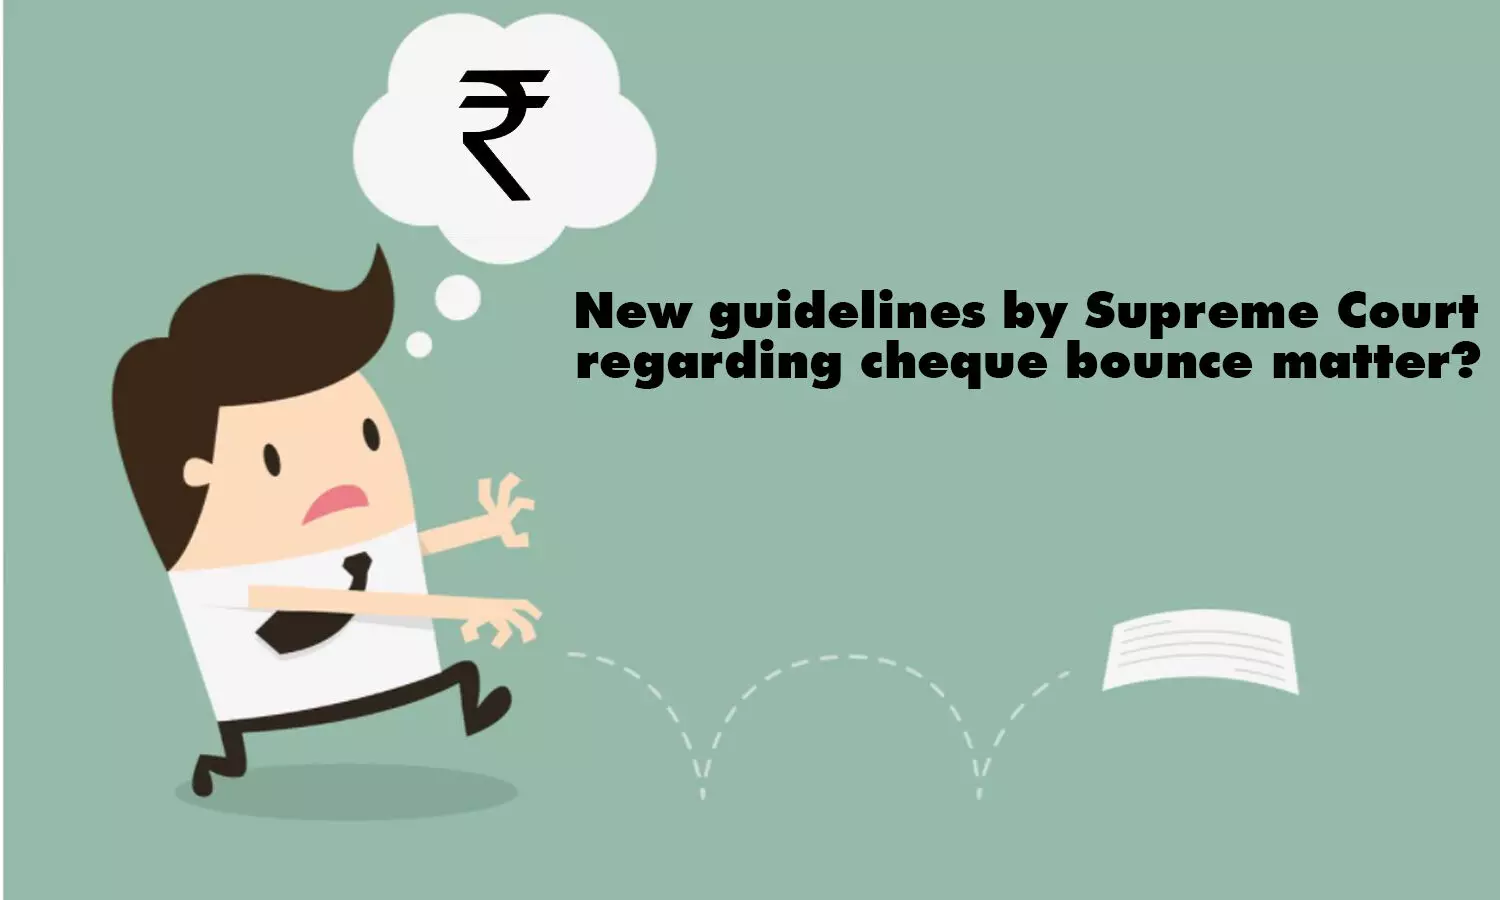 What are some new guidelines by Supreme Court regarding cheque bounce matter?